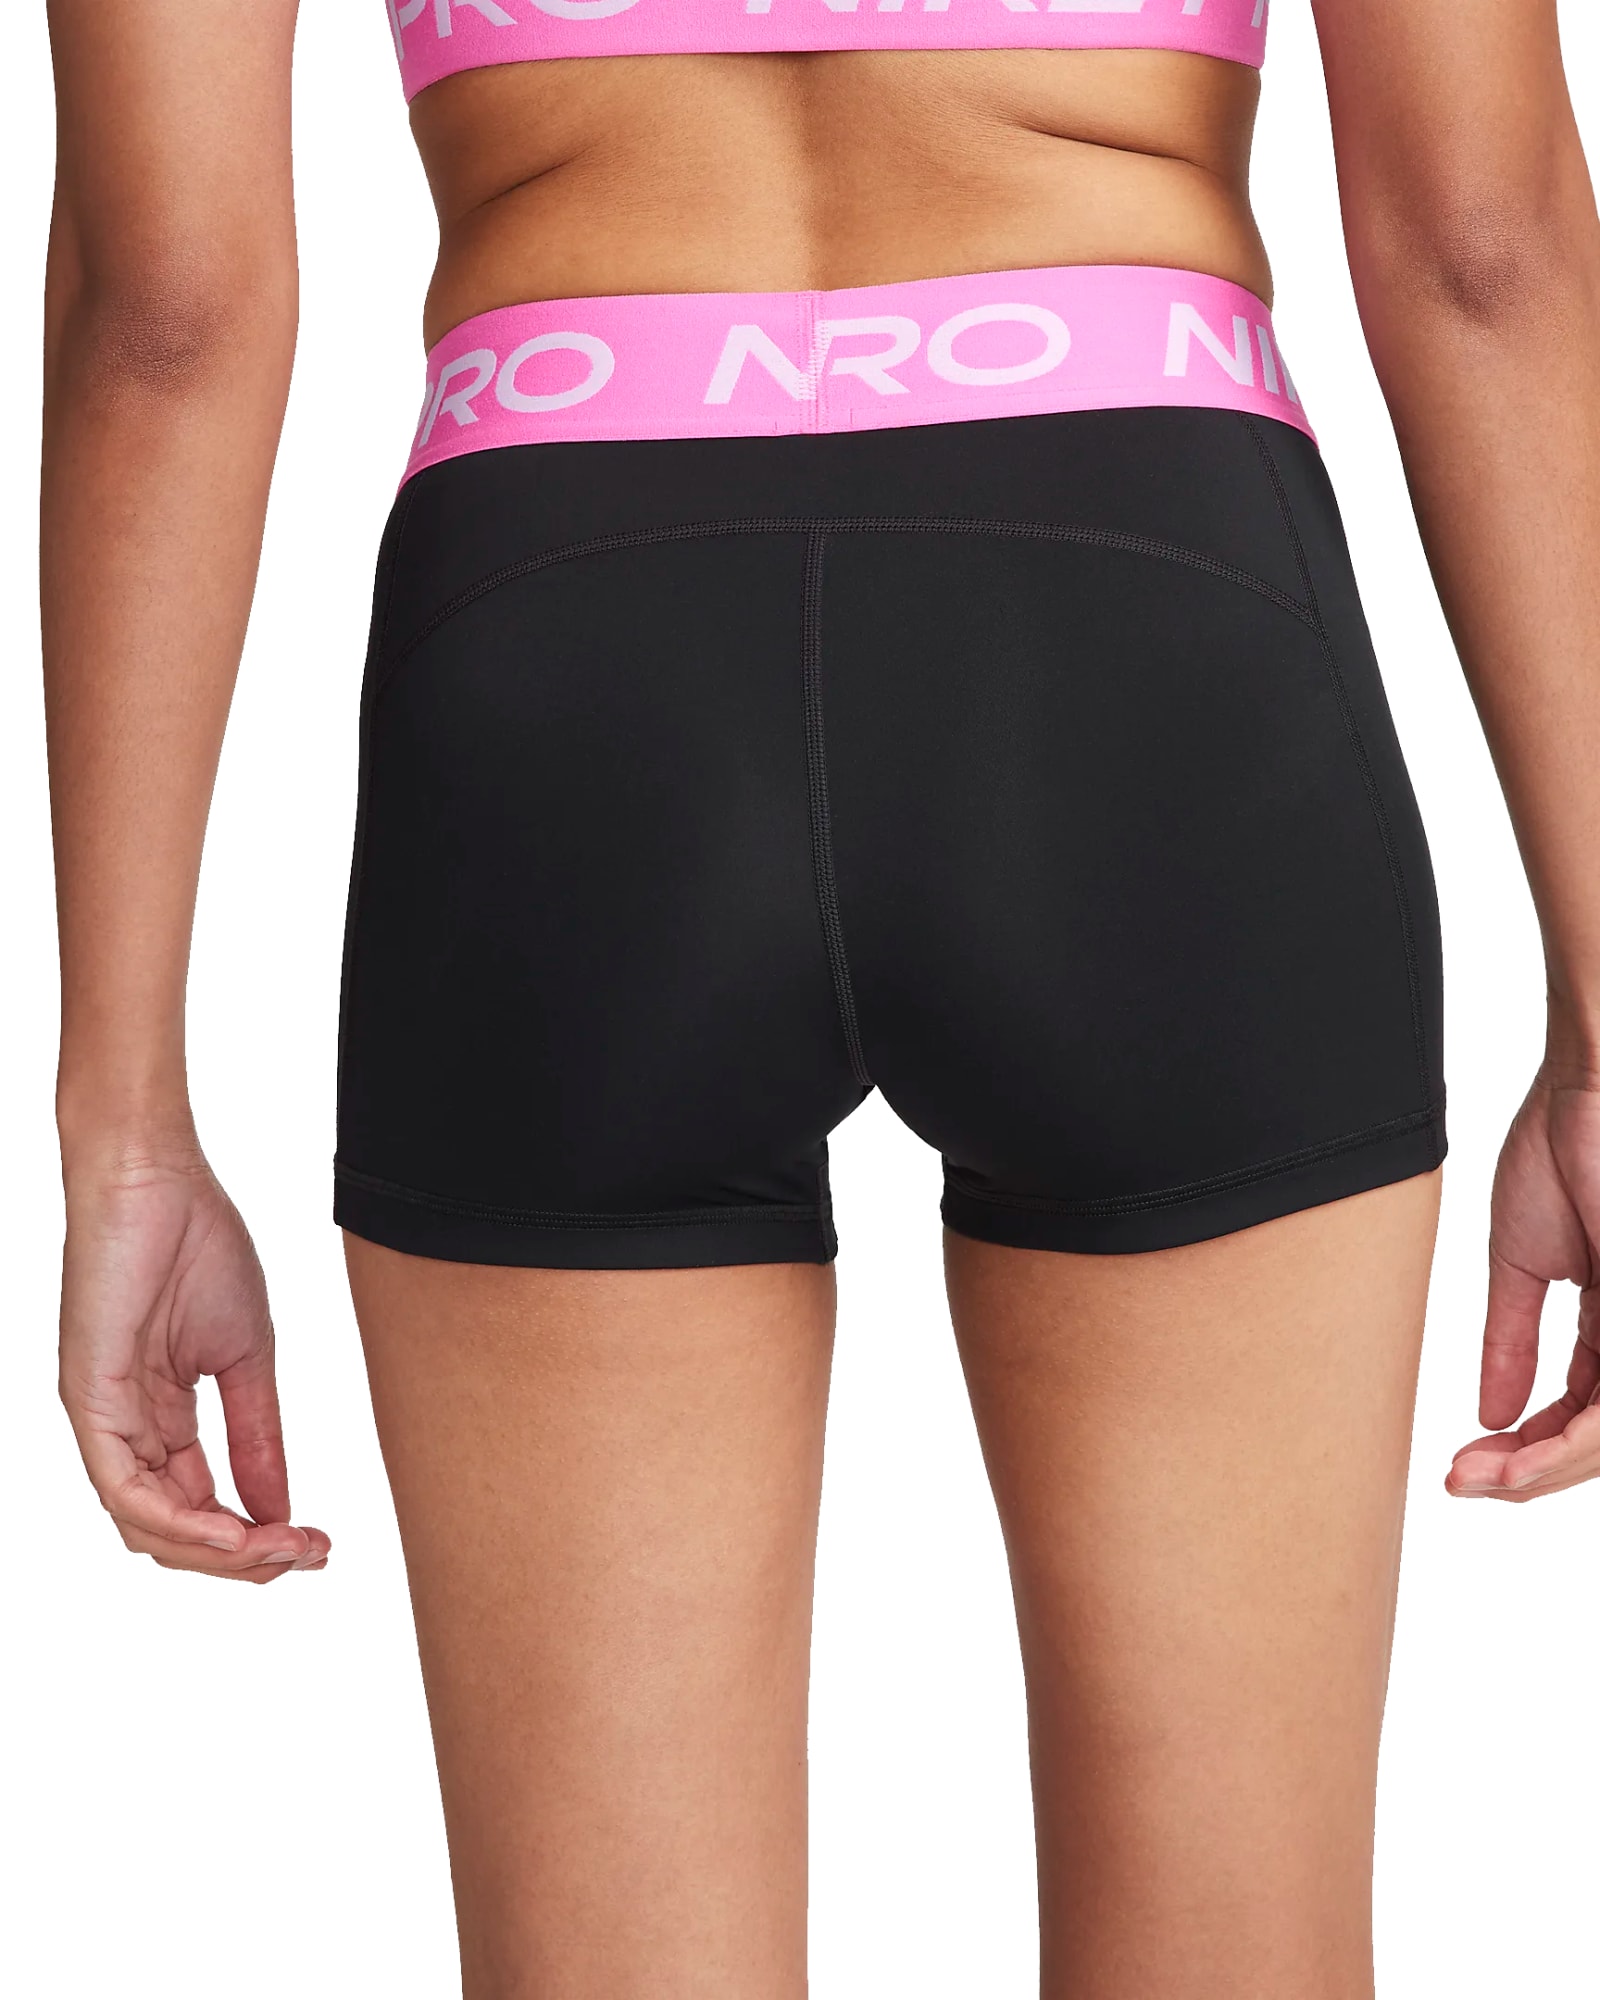 🎁 Giveaway - Slow Motion - Nike Pro Shorts and Sports Bra - Try On 